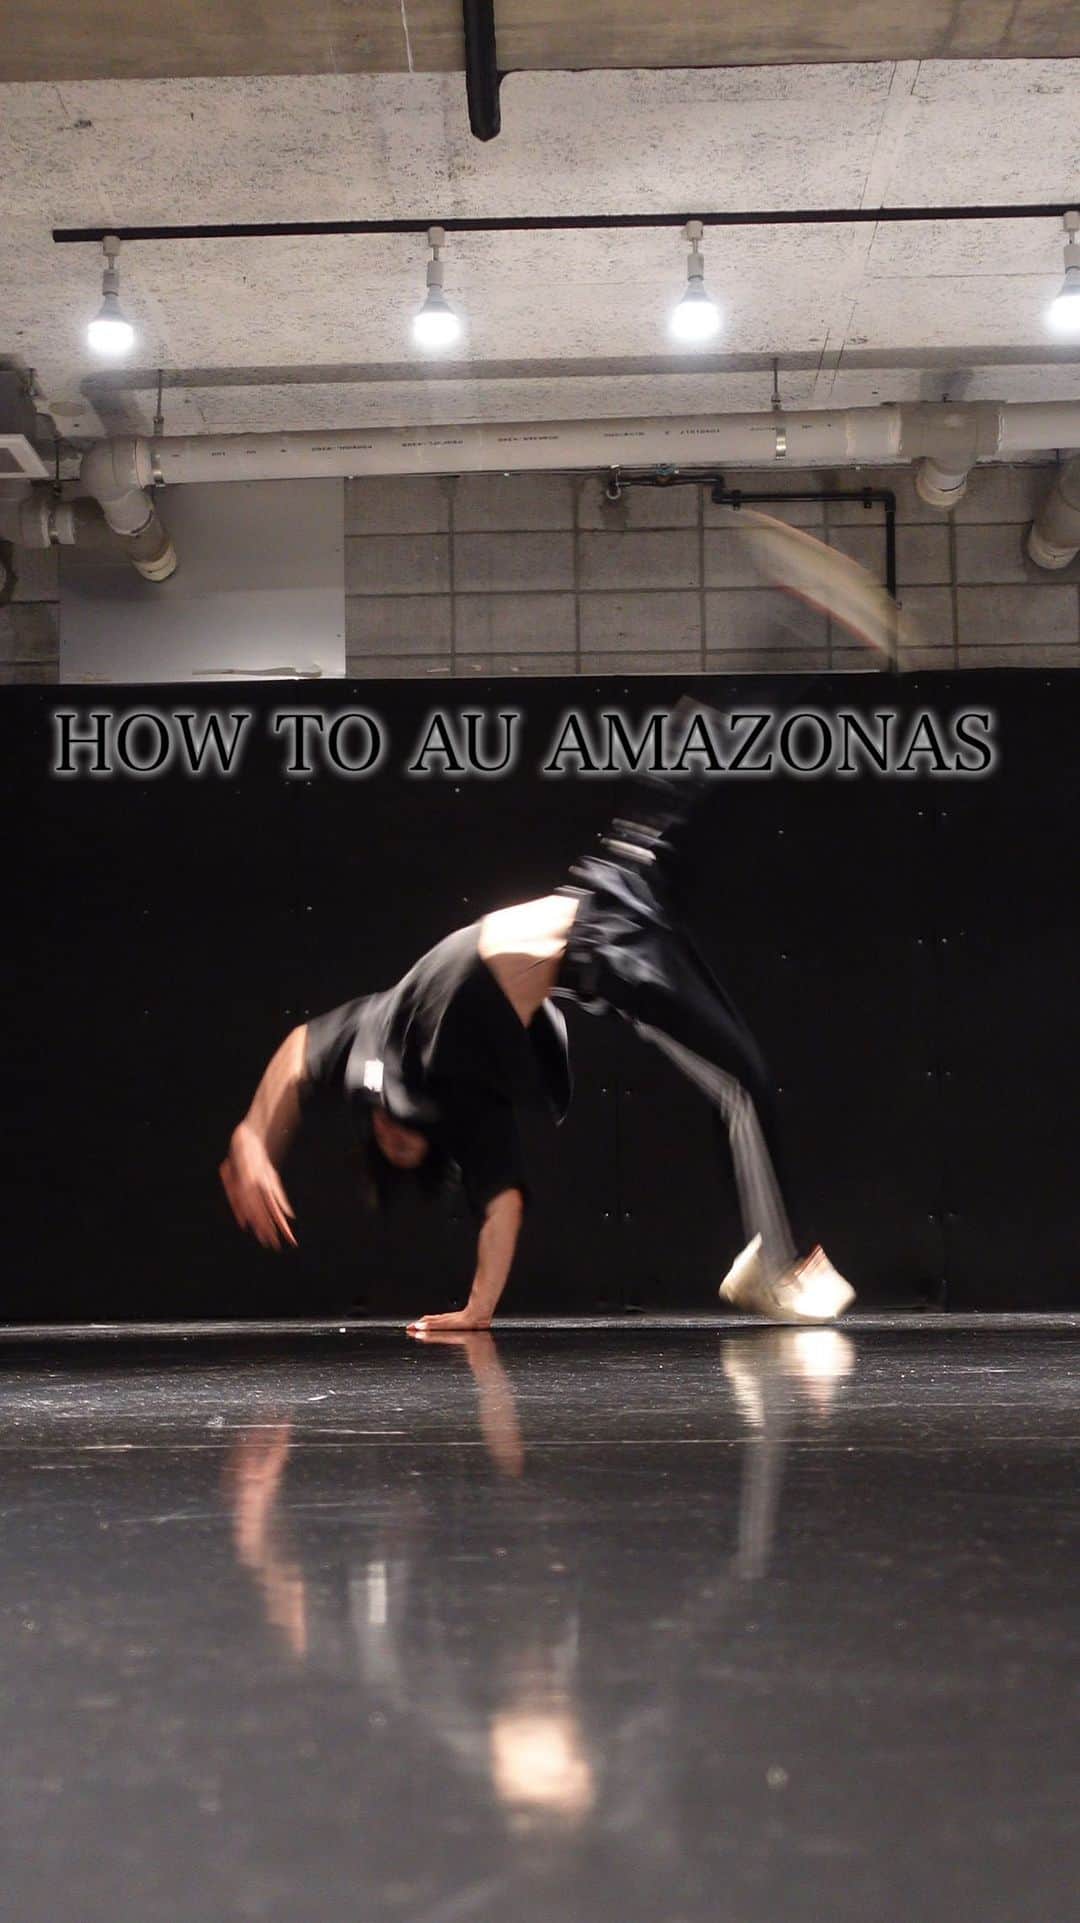 asukaのインスタグラム：「The easy way to learn 【AU AMAZONAS】   Everybody can do this skill 🔥   What do you think?🤔   Lectured by @bboy_asuka   If you can master it, let me know in the comments😉   ↓↓↓↓    #dance #breaking #breakdance #bboy #powermove #powermoves #acrobatics #tricking #parkour #gymnastics #movement #capoeira #ブレイキン #超人」